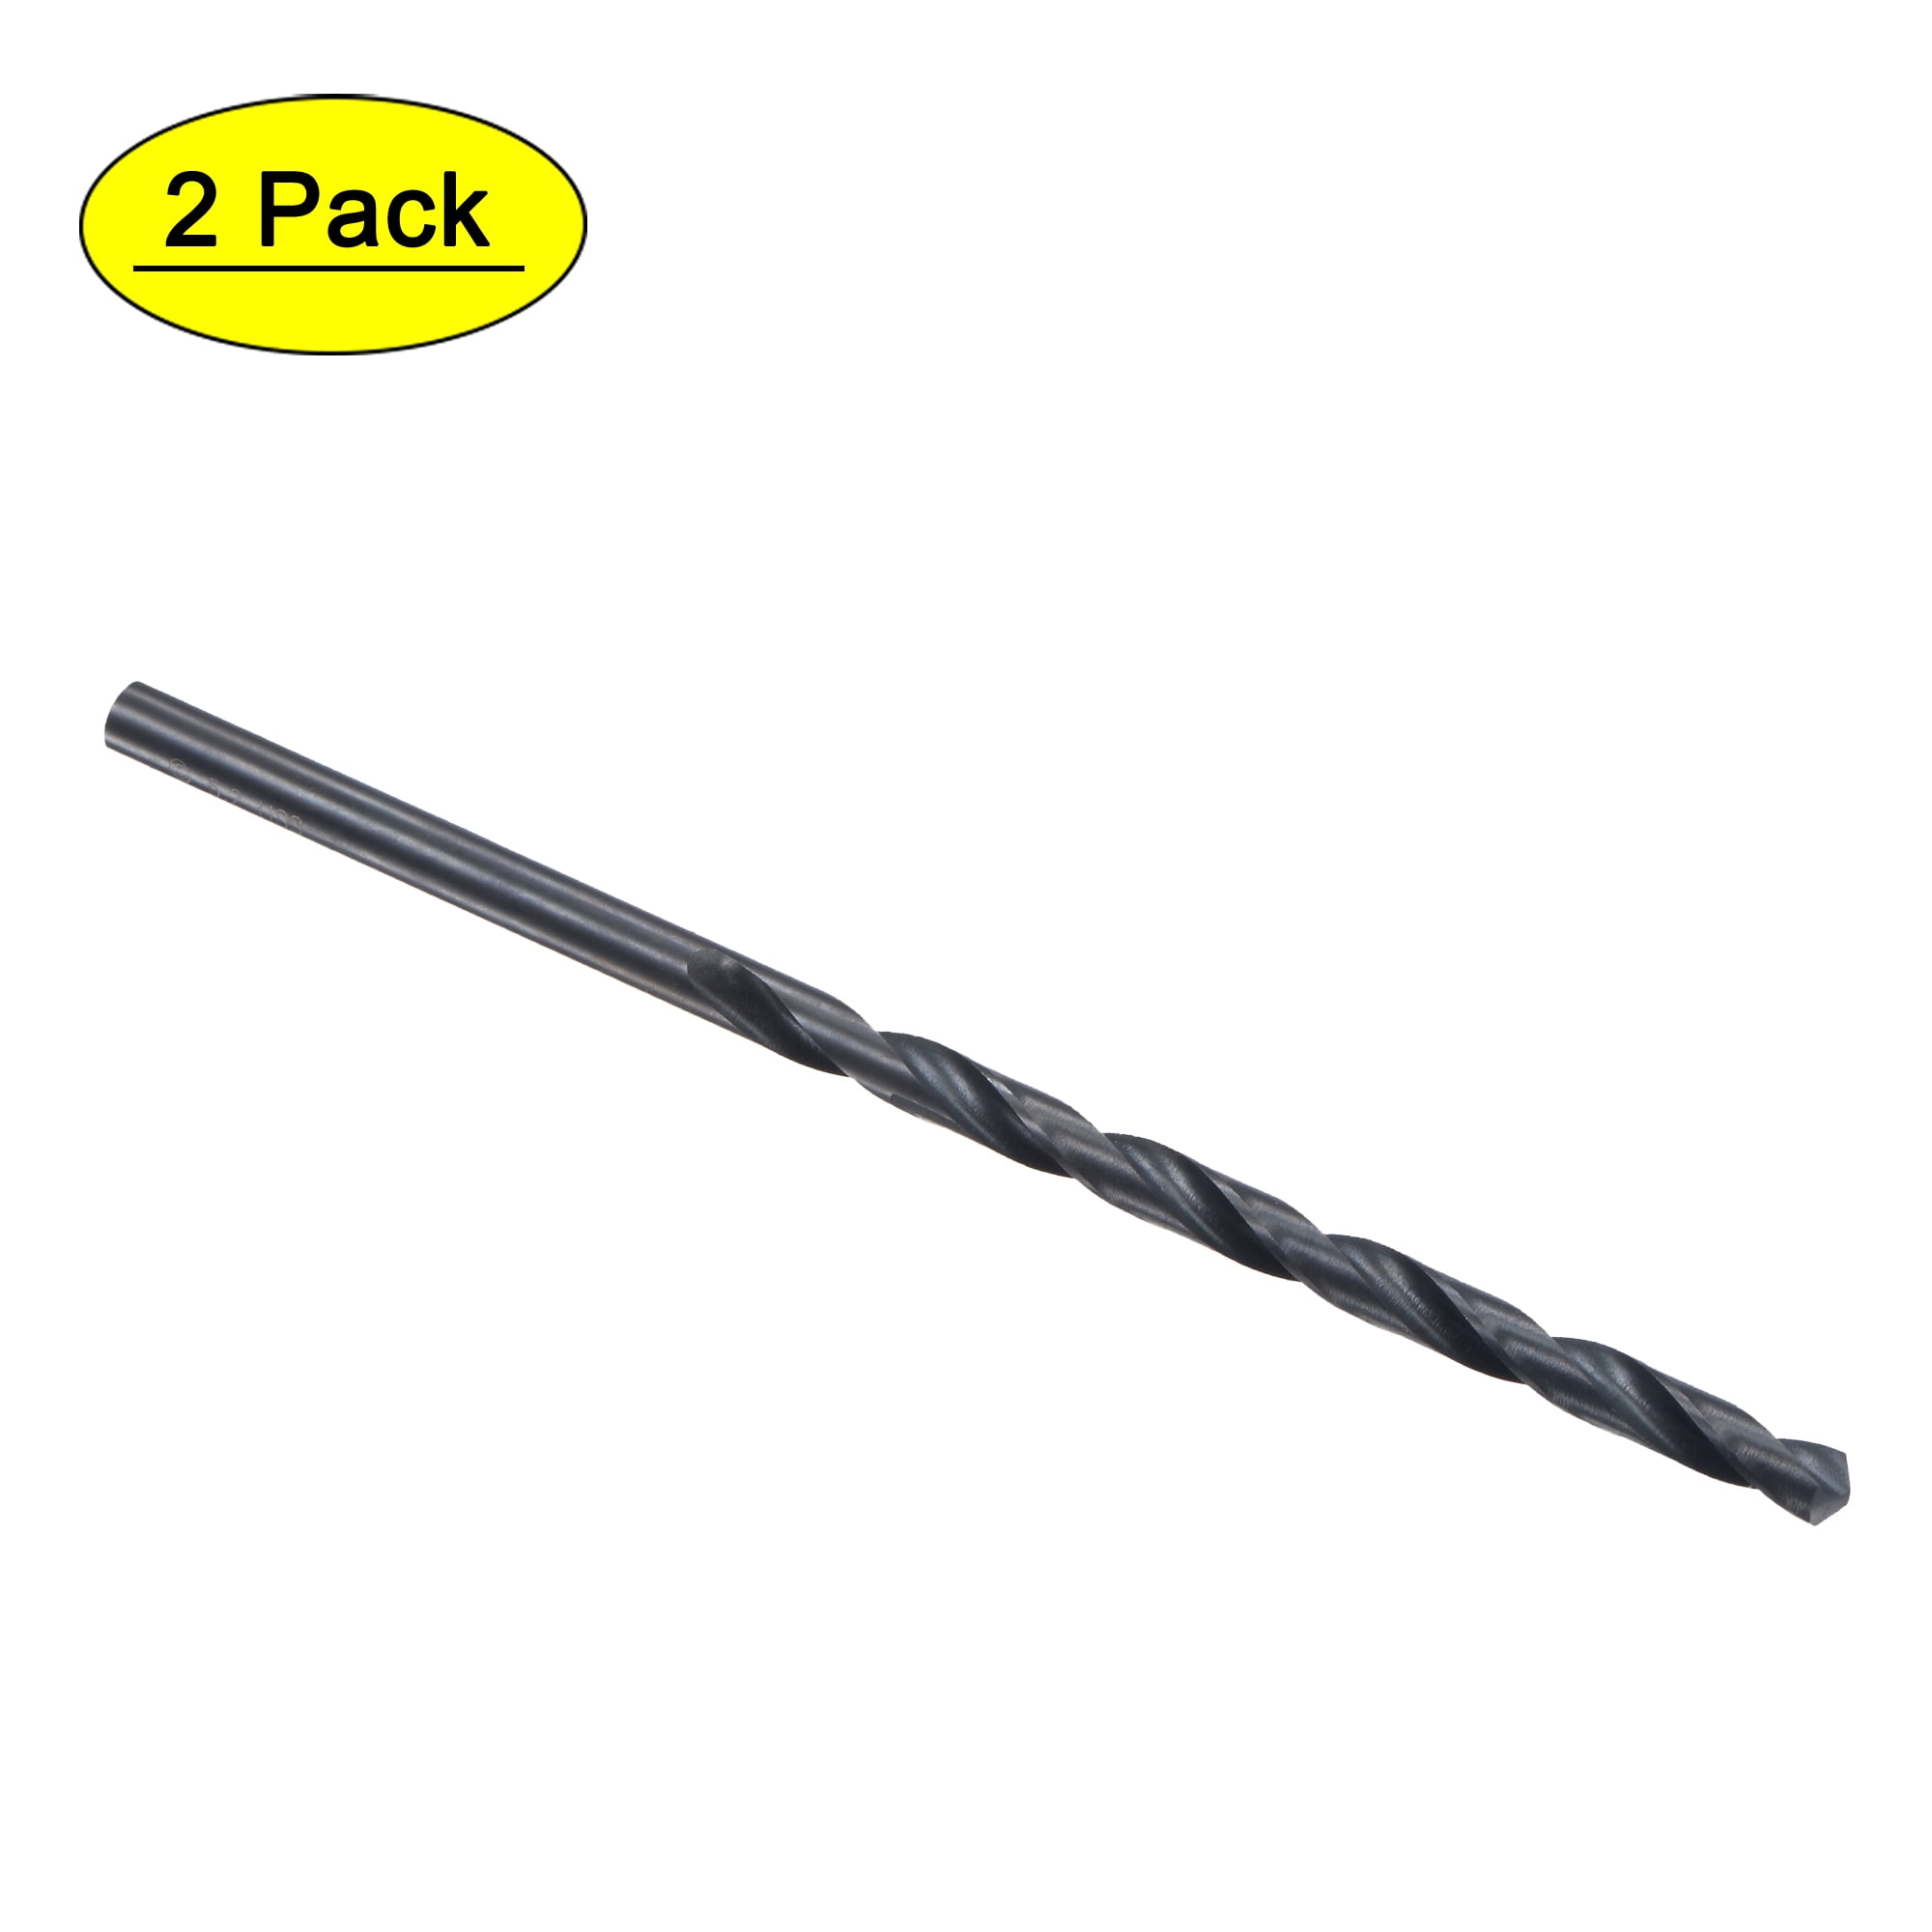 Ground flute 5.5mm M2 Steel Pack of 3 *Top Quality HSS extra long drill bit 